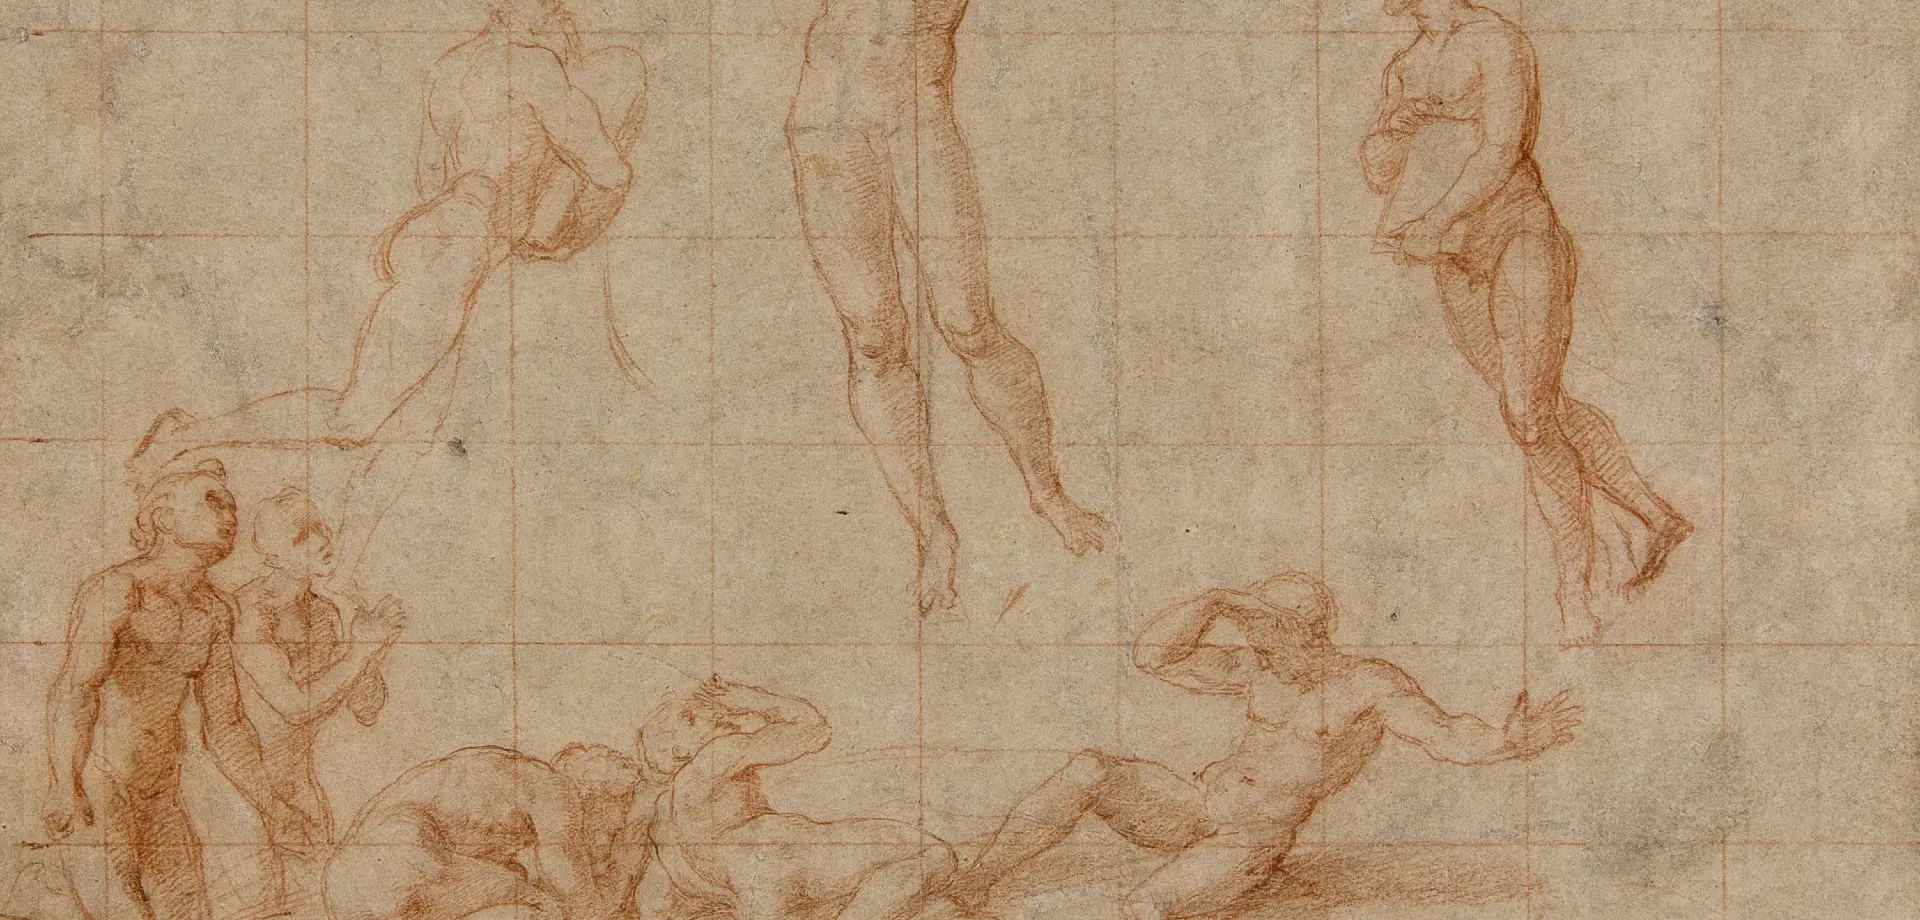 Study for the Transfiguration